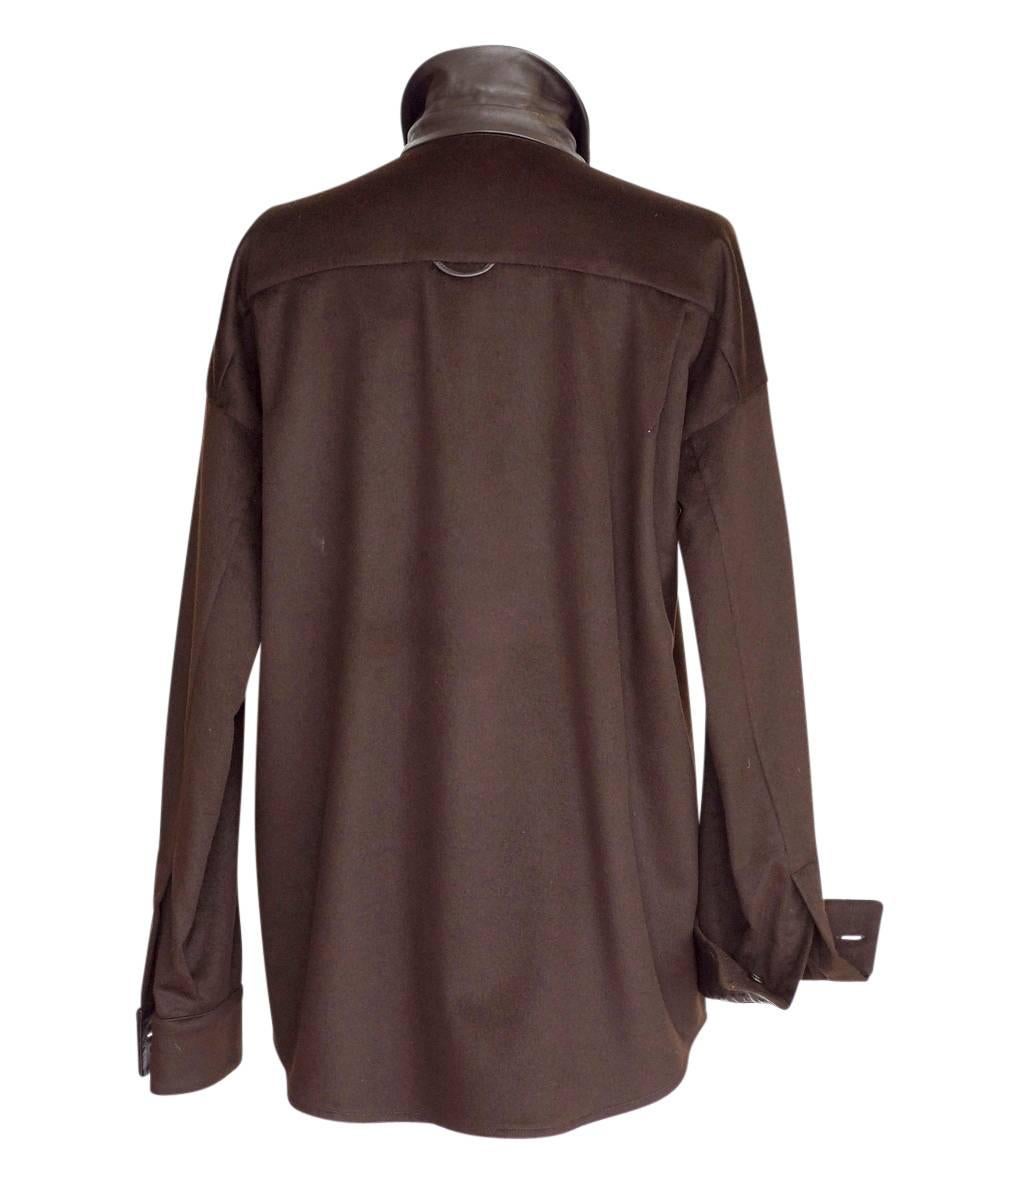 Agnona Shirt Cashmere and Leather Details Rich Chocolate Brown 46 4